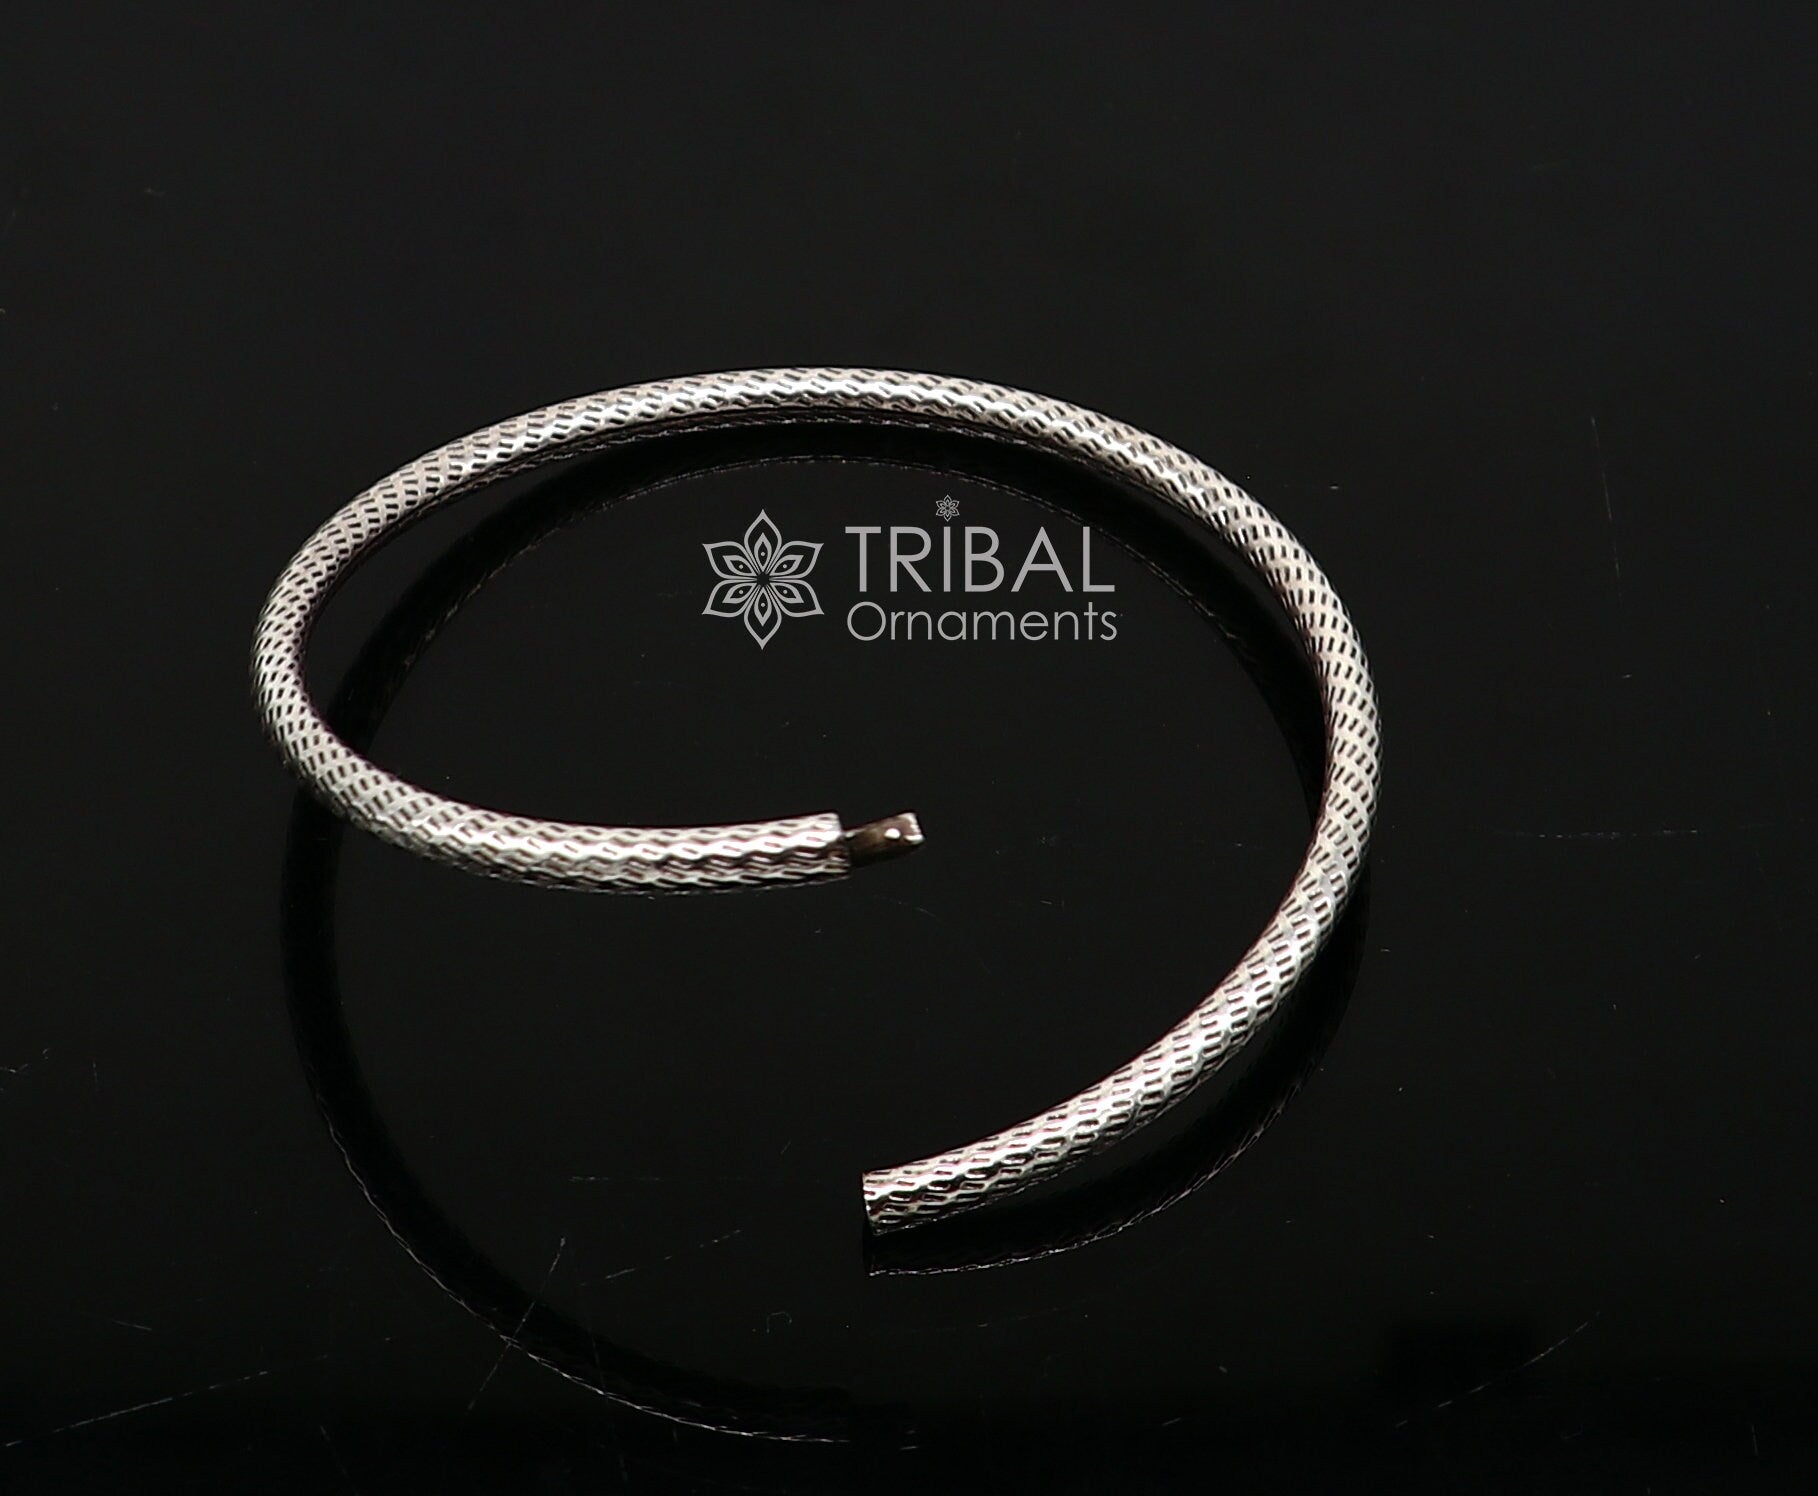 Pure 925 sterling silver unique vintage style bangle bracelet kada, excellent classical gifting bangle men's or girls ethnic jewelry nsk672 - TRIBAL ORNAMENTS